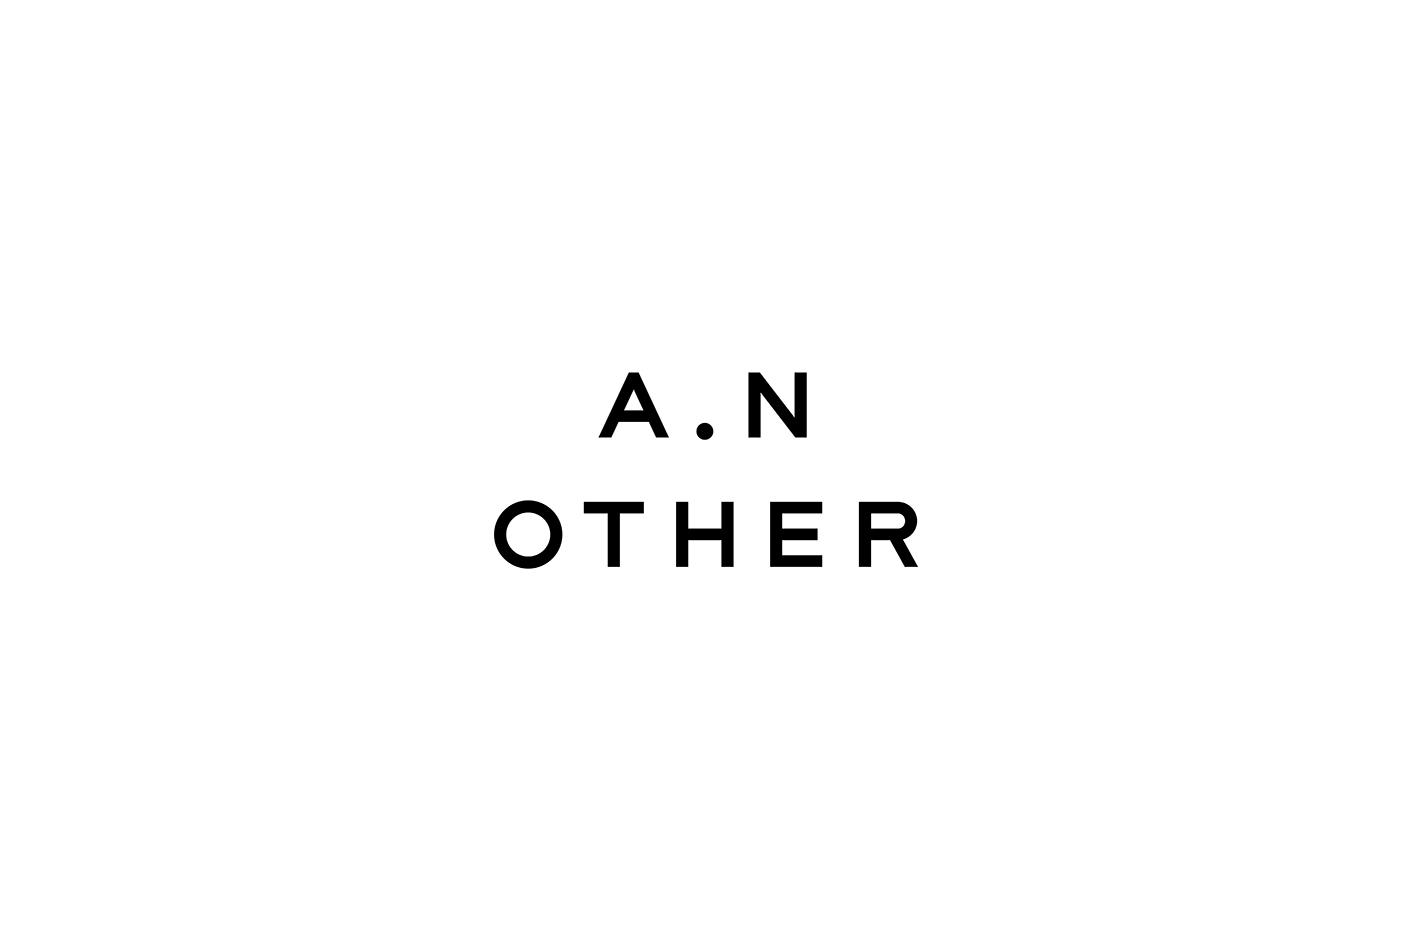 A.N. Other